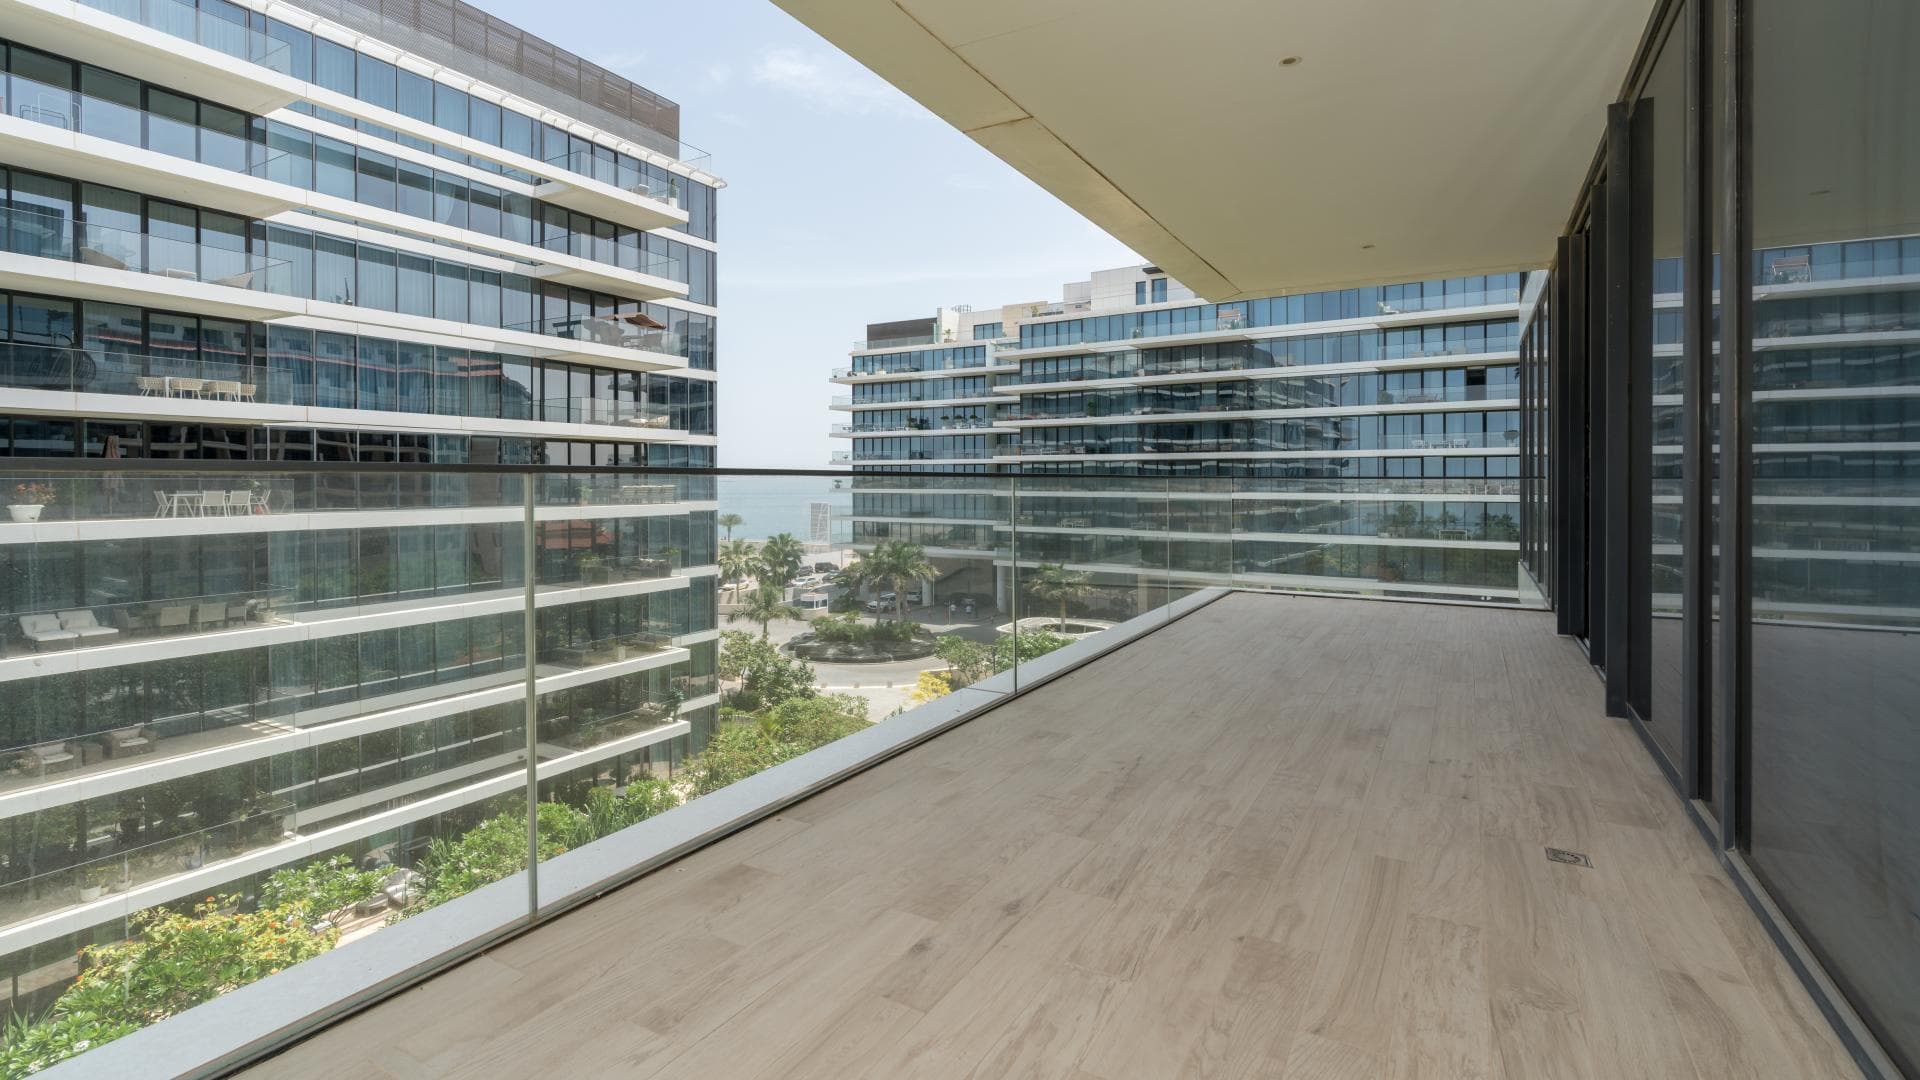 2 Bedroom Apartment For Rent Serenia Residences The Palm Lp21499 Cc75631637fc880.jpg